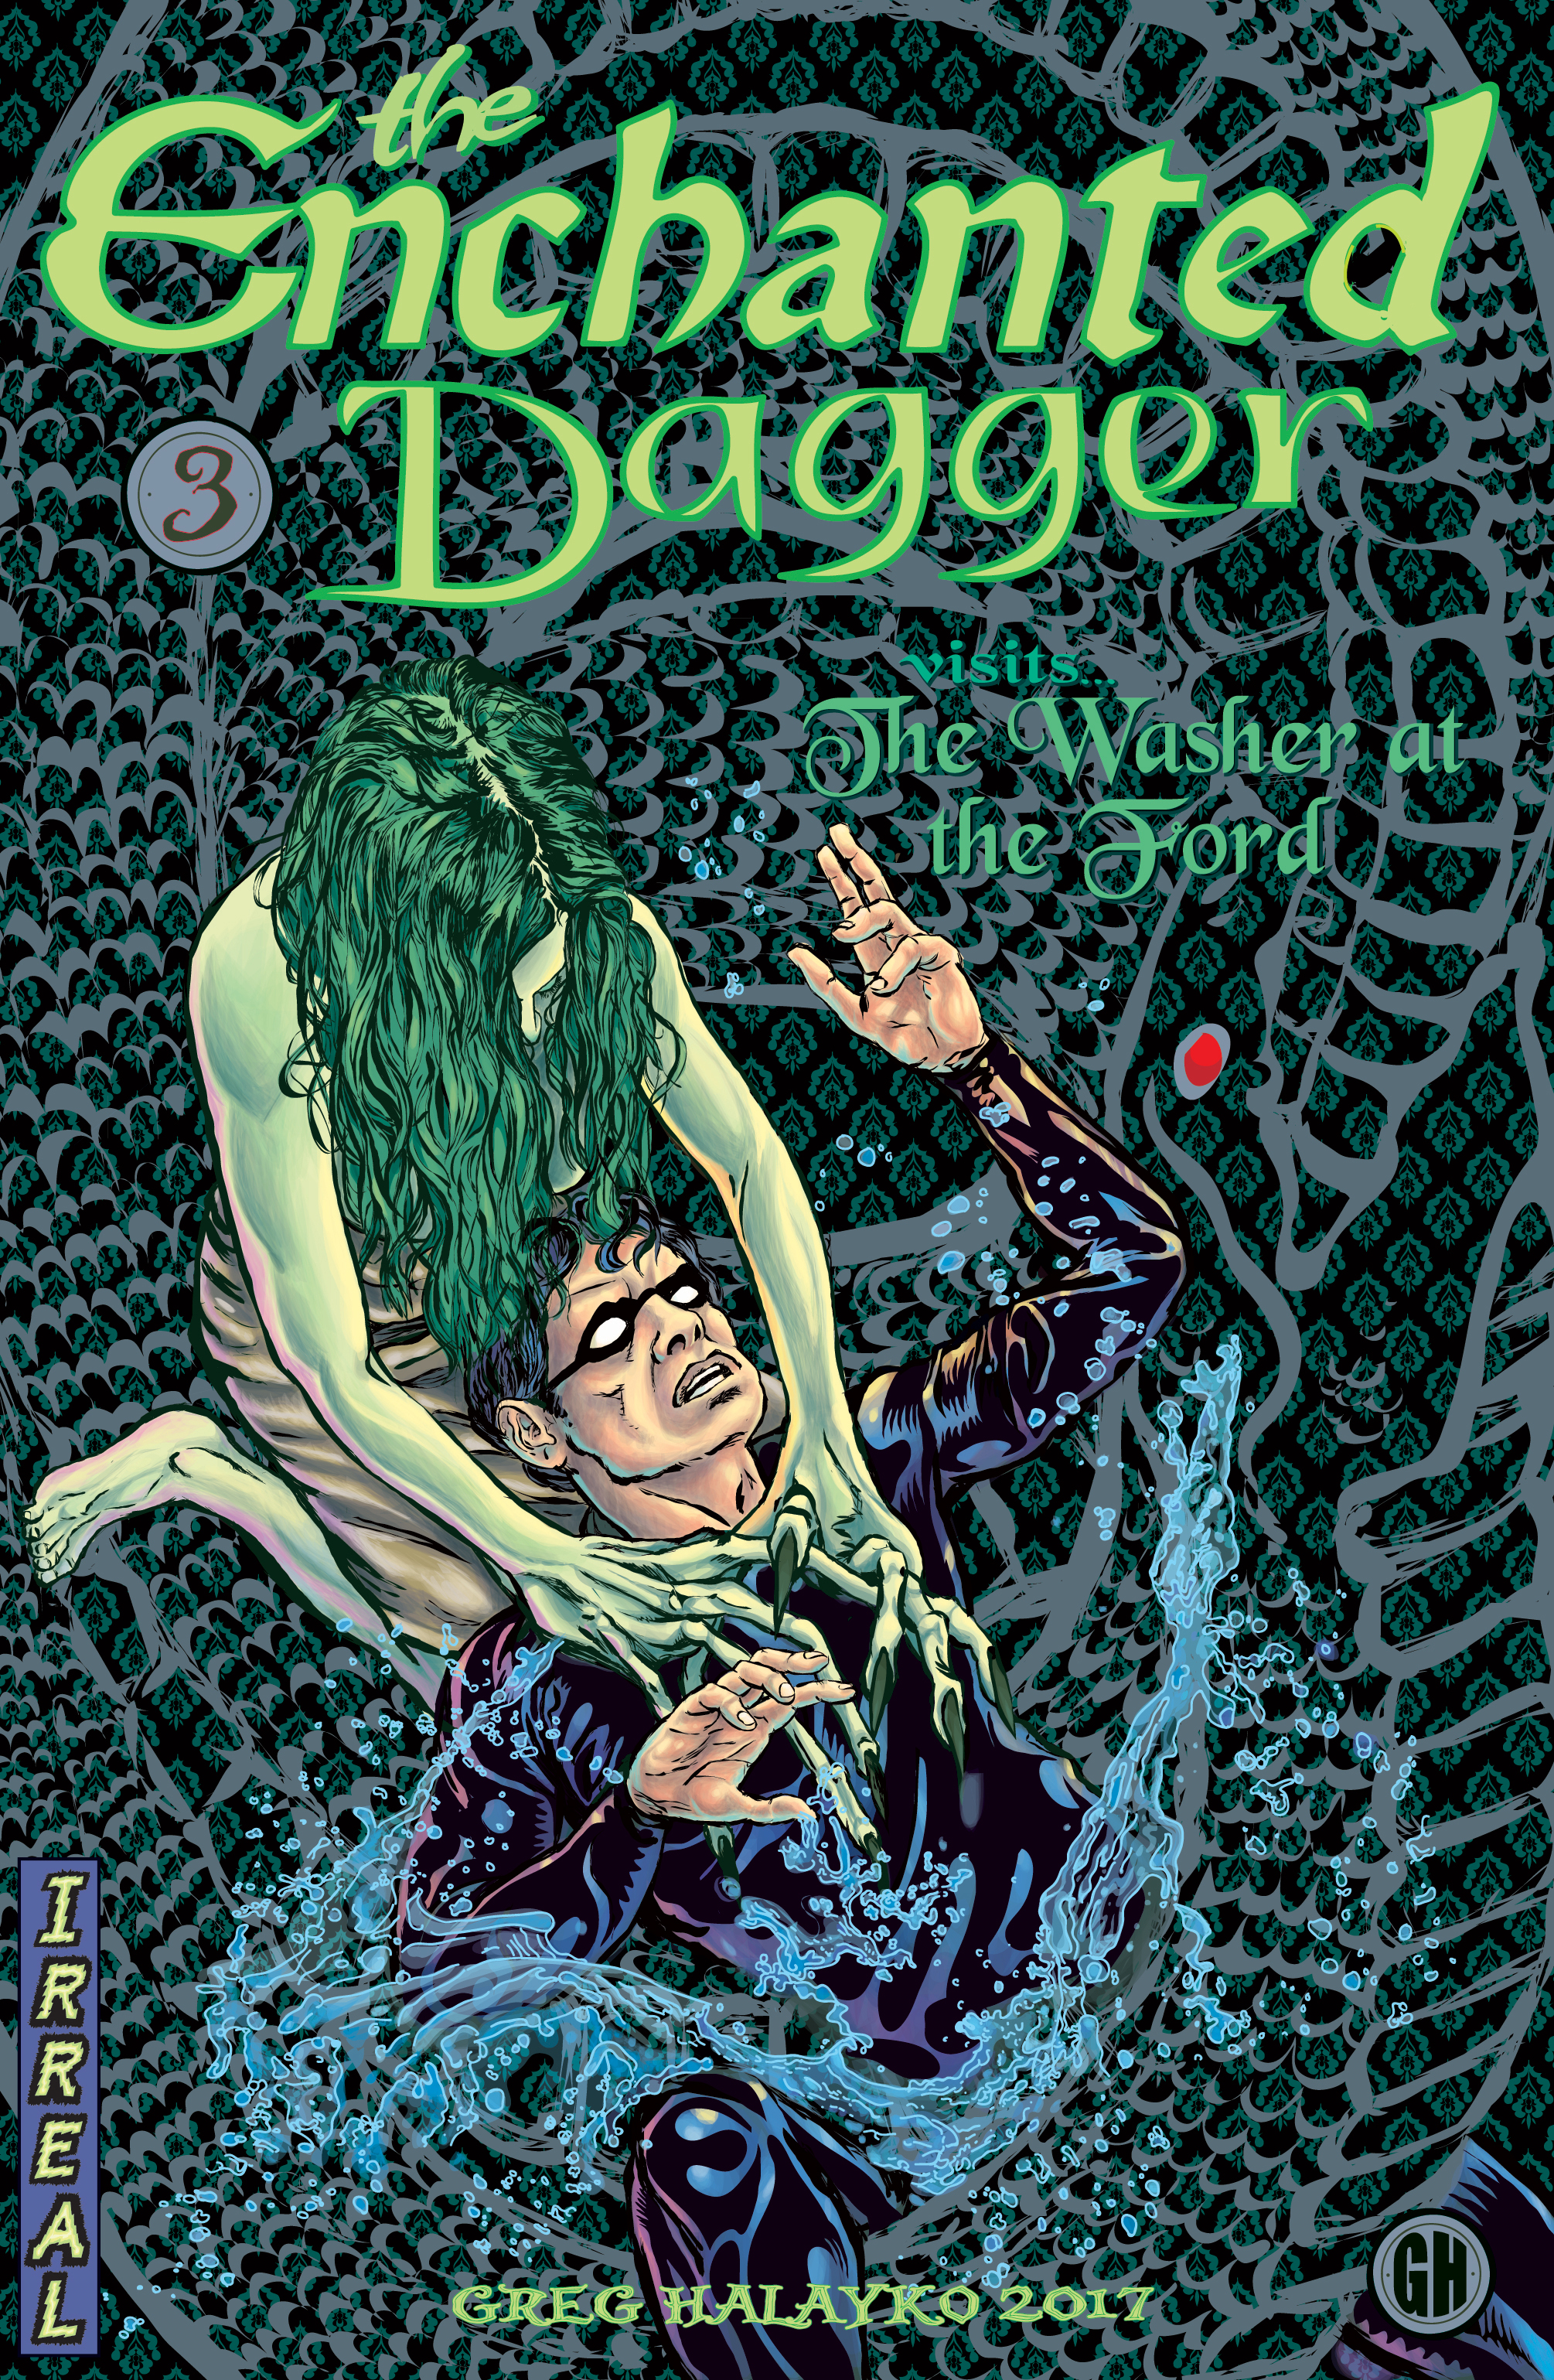 The Enchanted Dagger #3 – Cover